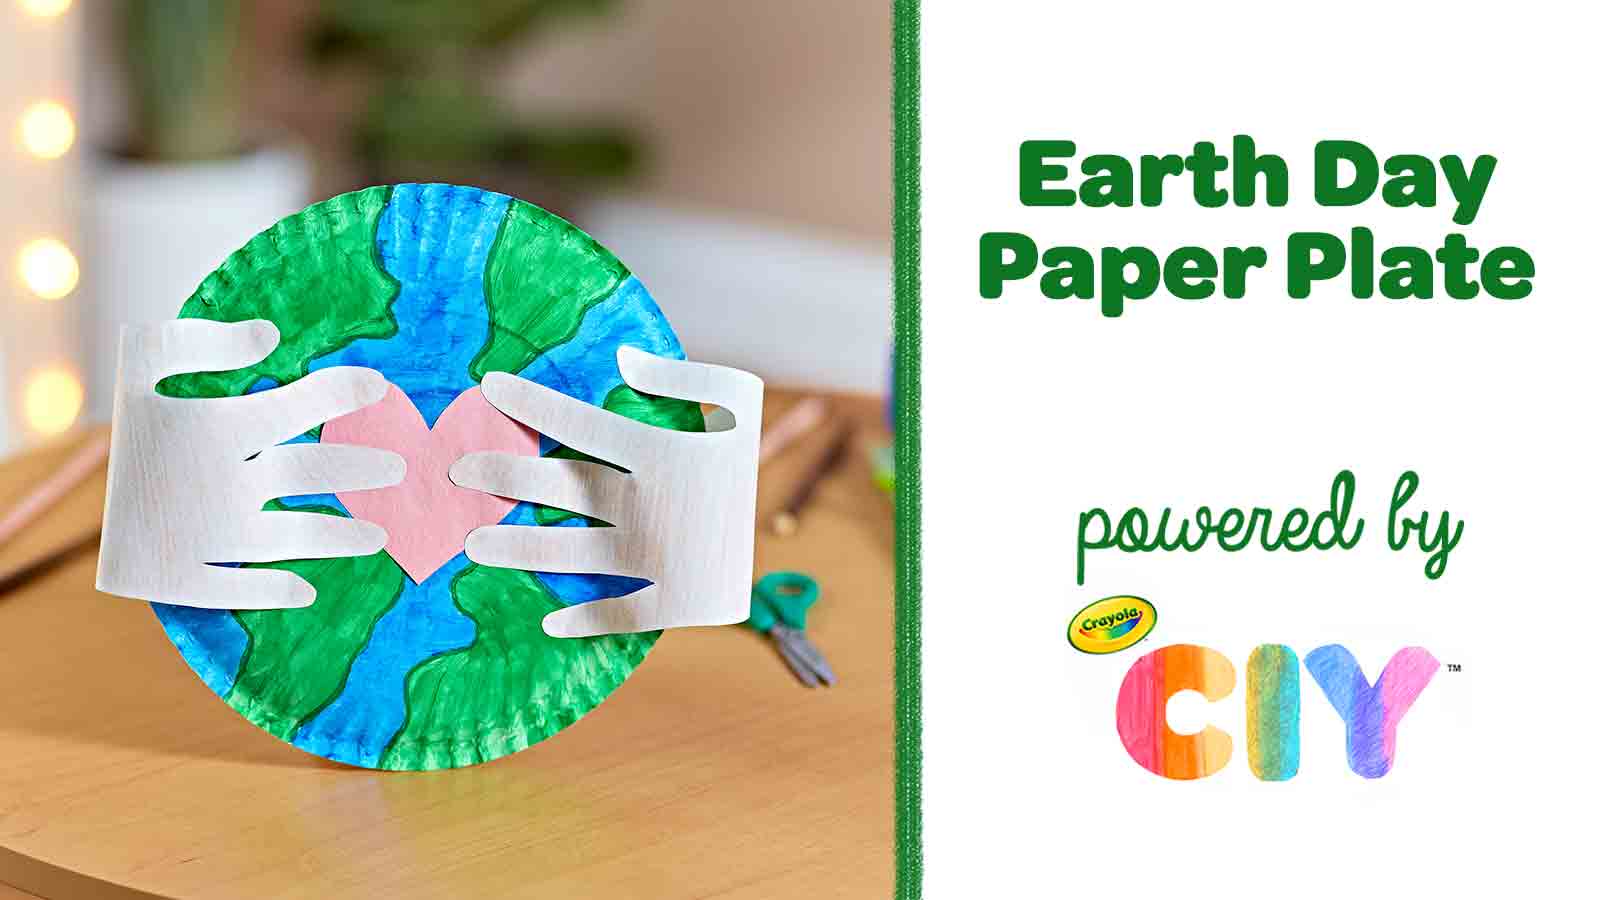 https://www.crayola.com/-/media/Crafts-New/Poster-Frames/Earth-Day-Paper-Plate_Poster-Frame_Template.jpg